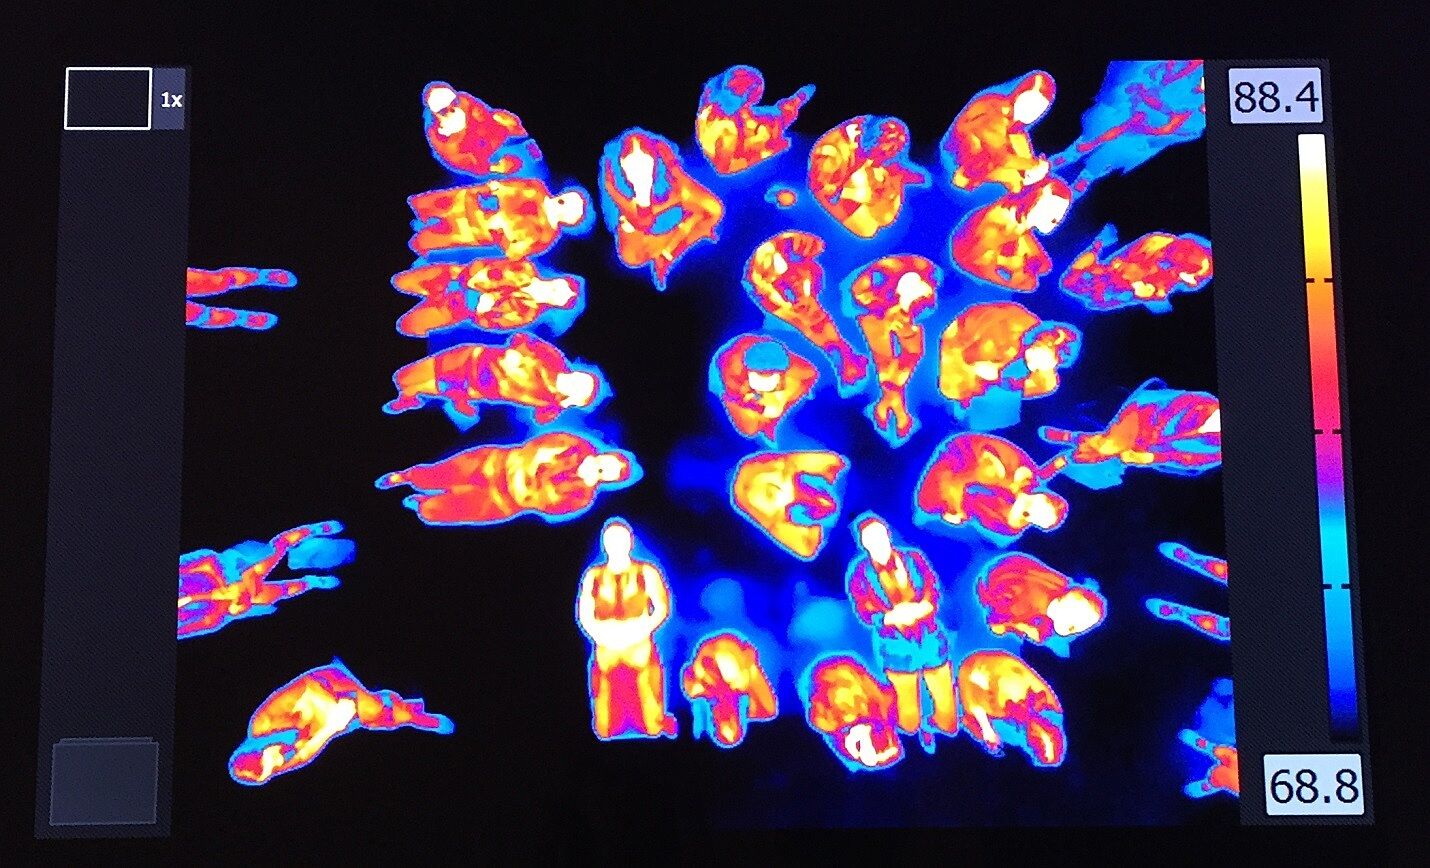 Thermal scan image of people. 